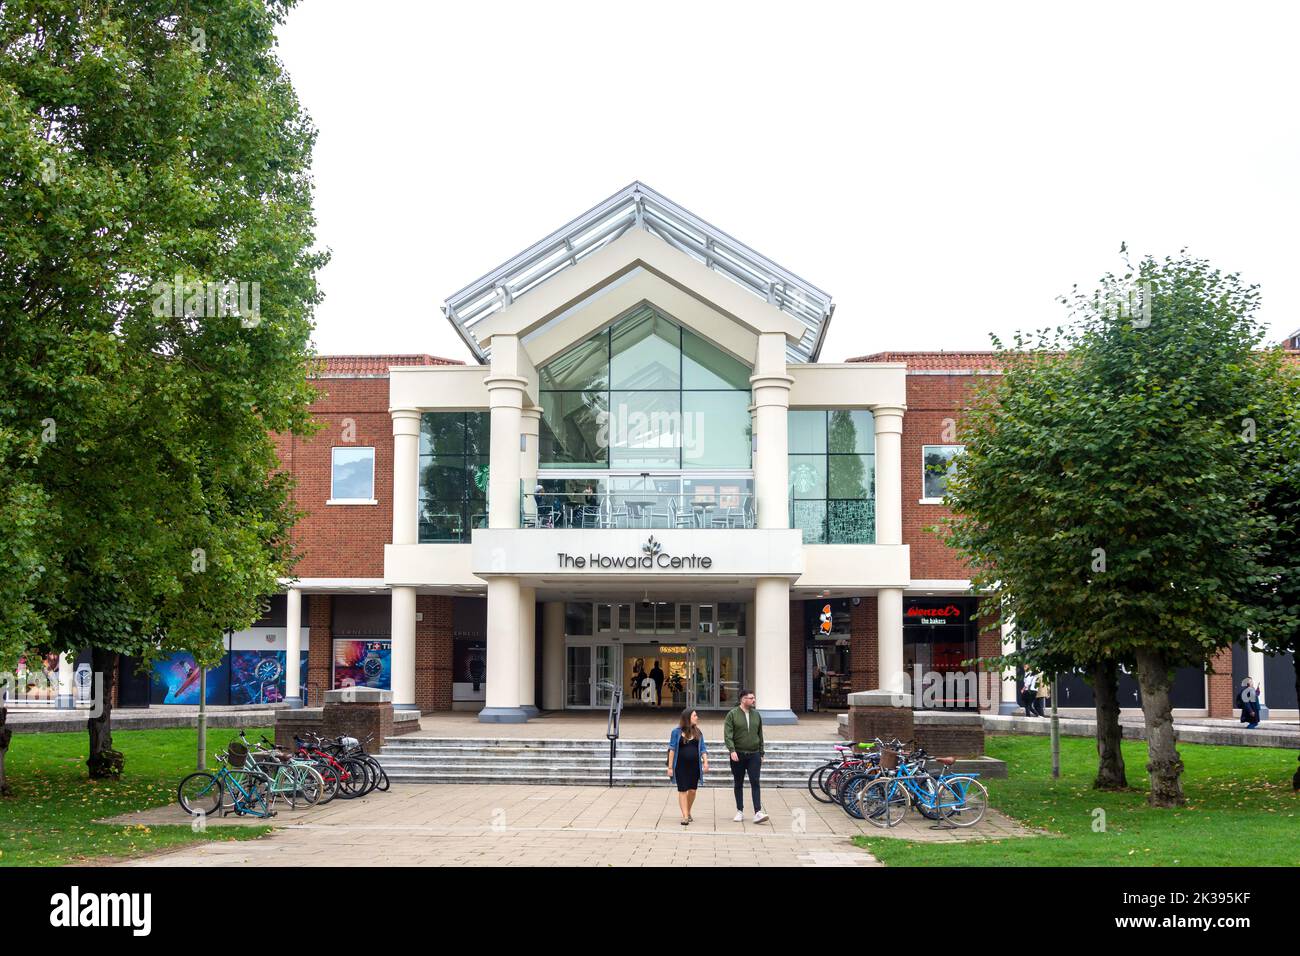 Le Howard Center Shopping Mall, Welwyn Garden City Centre, Hertfordshire, Angleterre, Royaume-Uni Banque D'Images